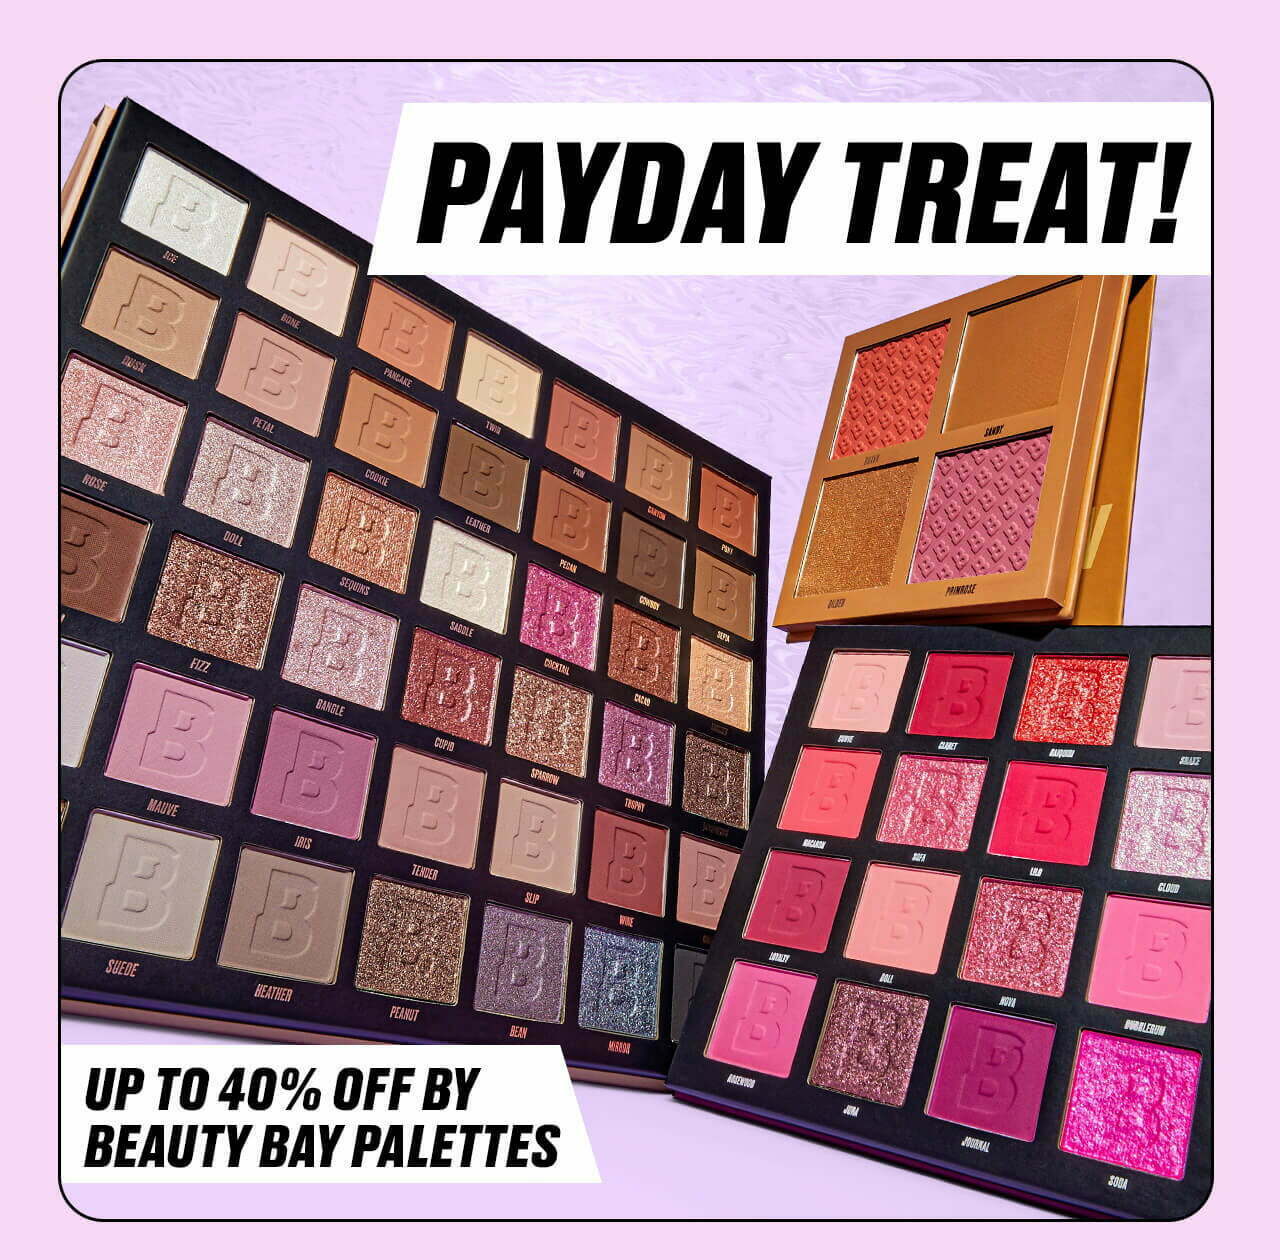 Up to 40% off by BEAUTY BAY palletes